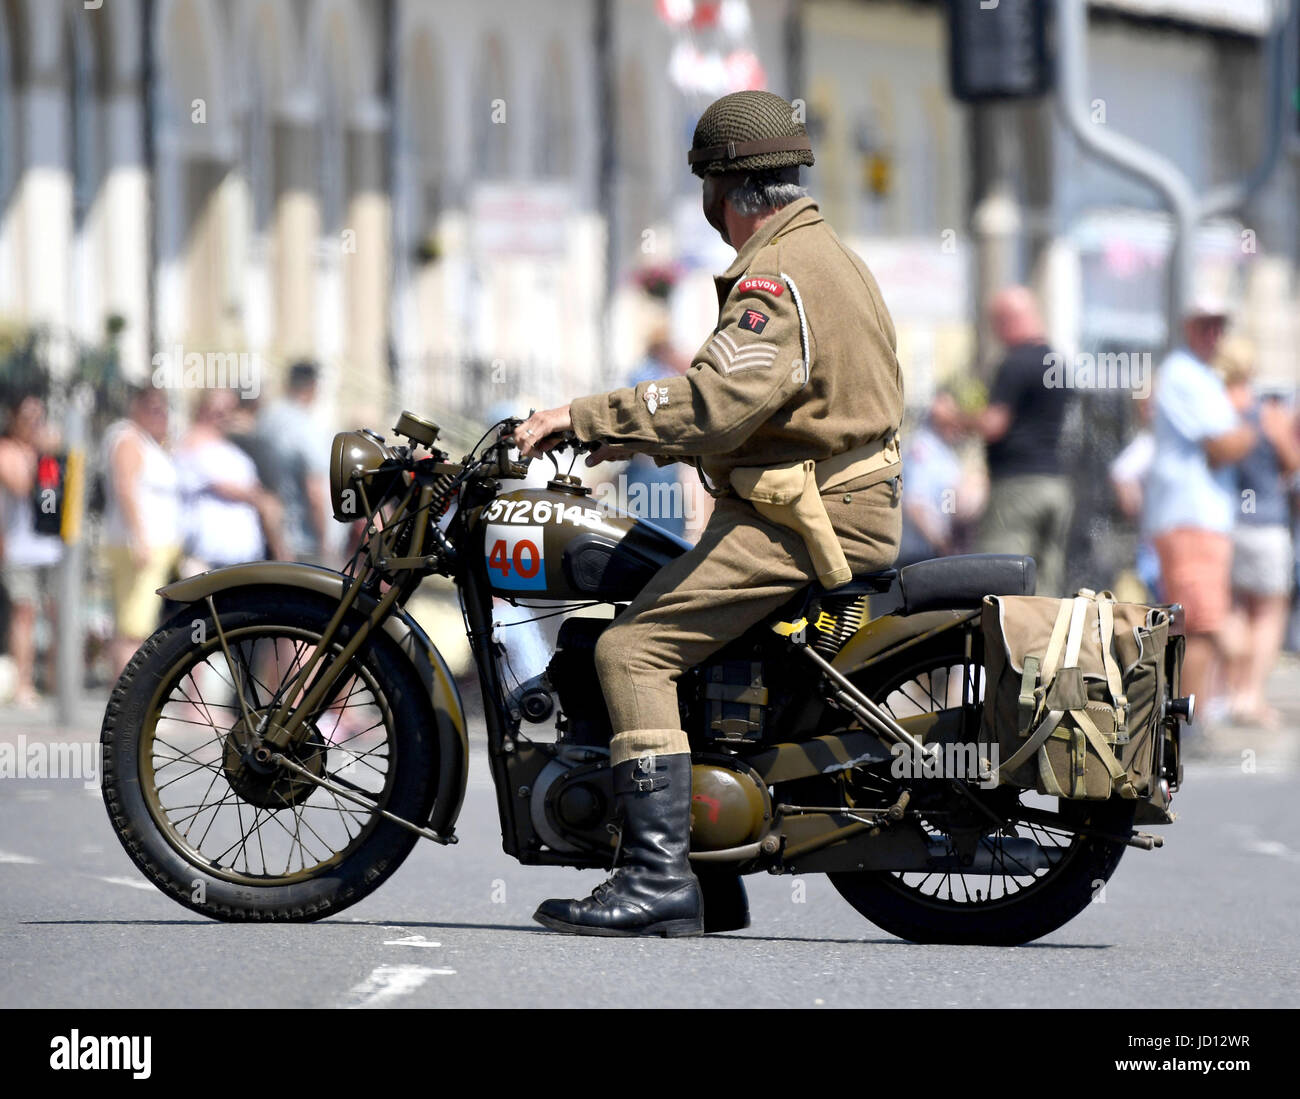 Weymouth, Dorset, UK. 18th June, 2017. Wartime vintage motorcycle Credit: Finnbarr Webster/Alamy Live News Stock Photo